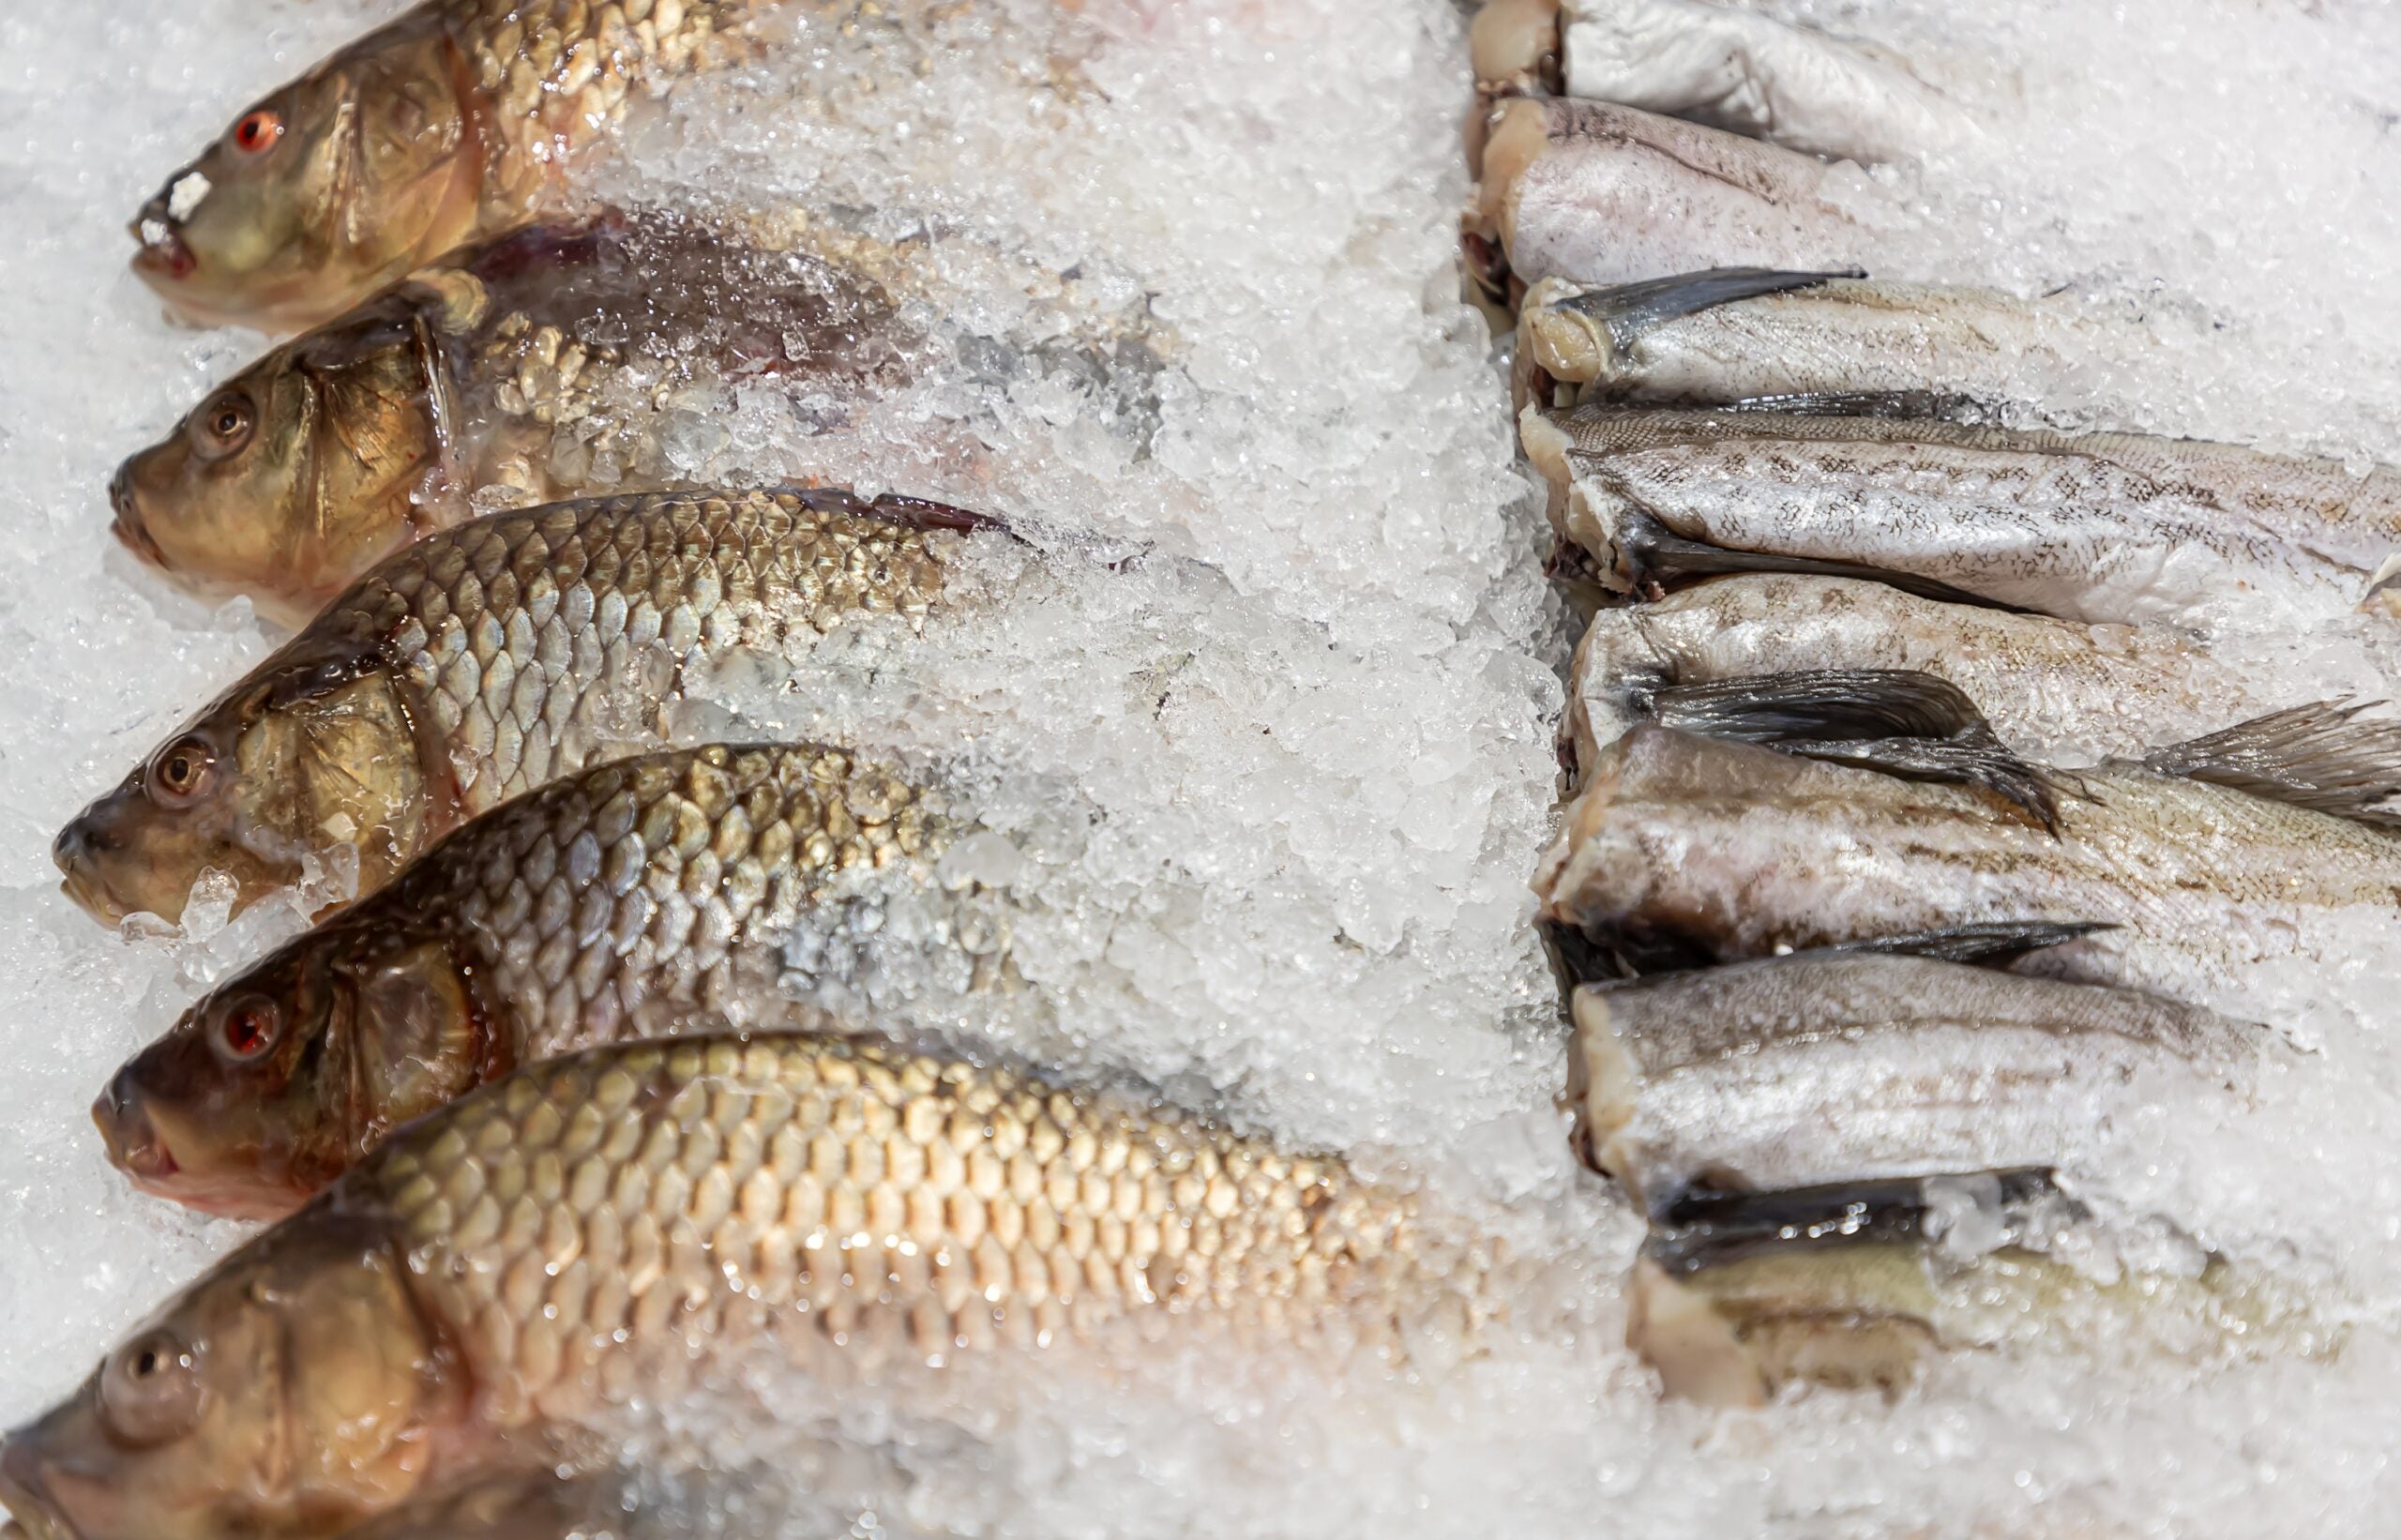 UK’s Thistle Seafoods buys Dawnfresh Seafoods asset out of administration